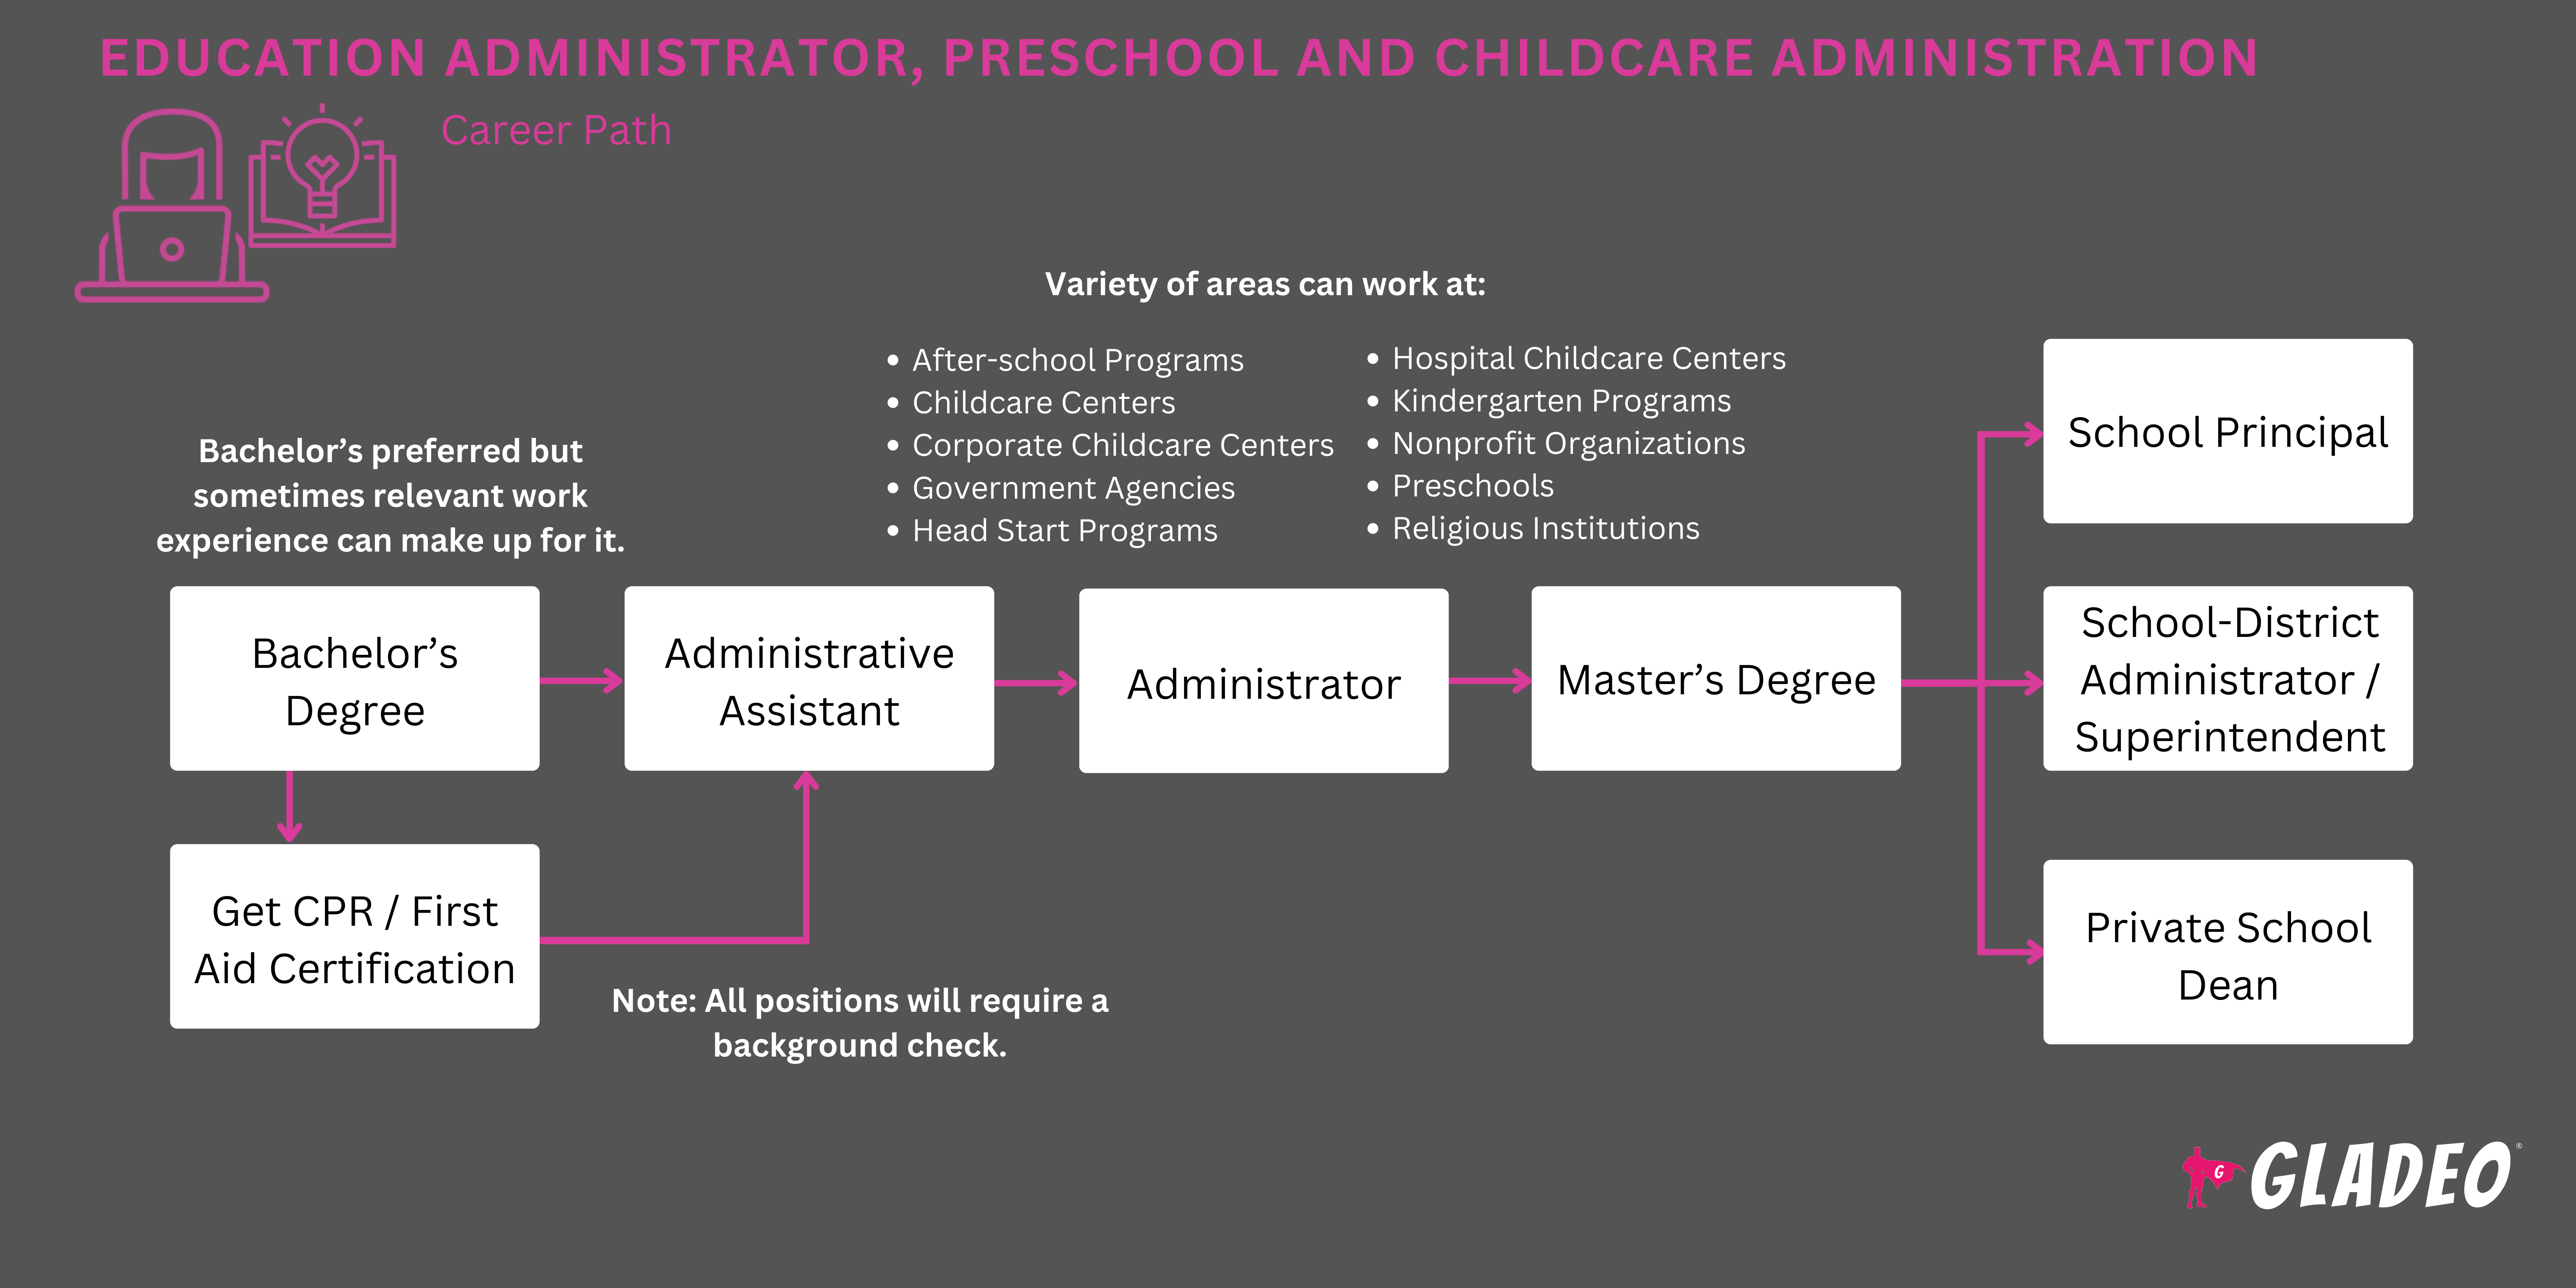 Education Administrator, Preschool and Childcare Administration Roadmap